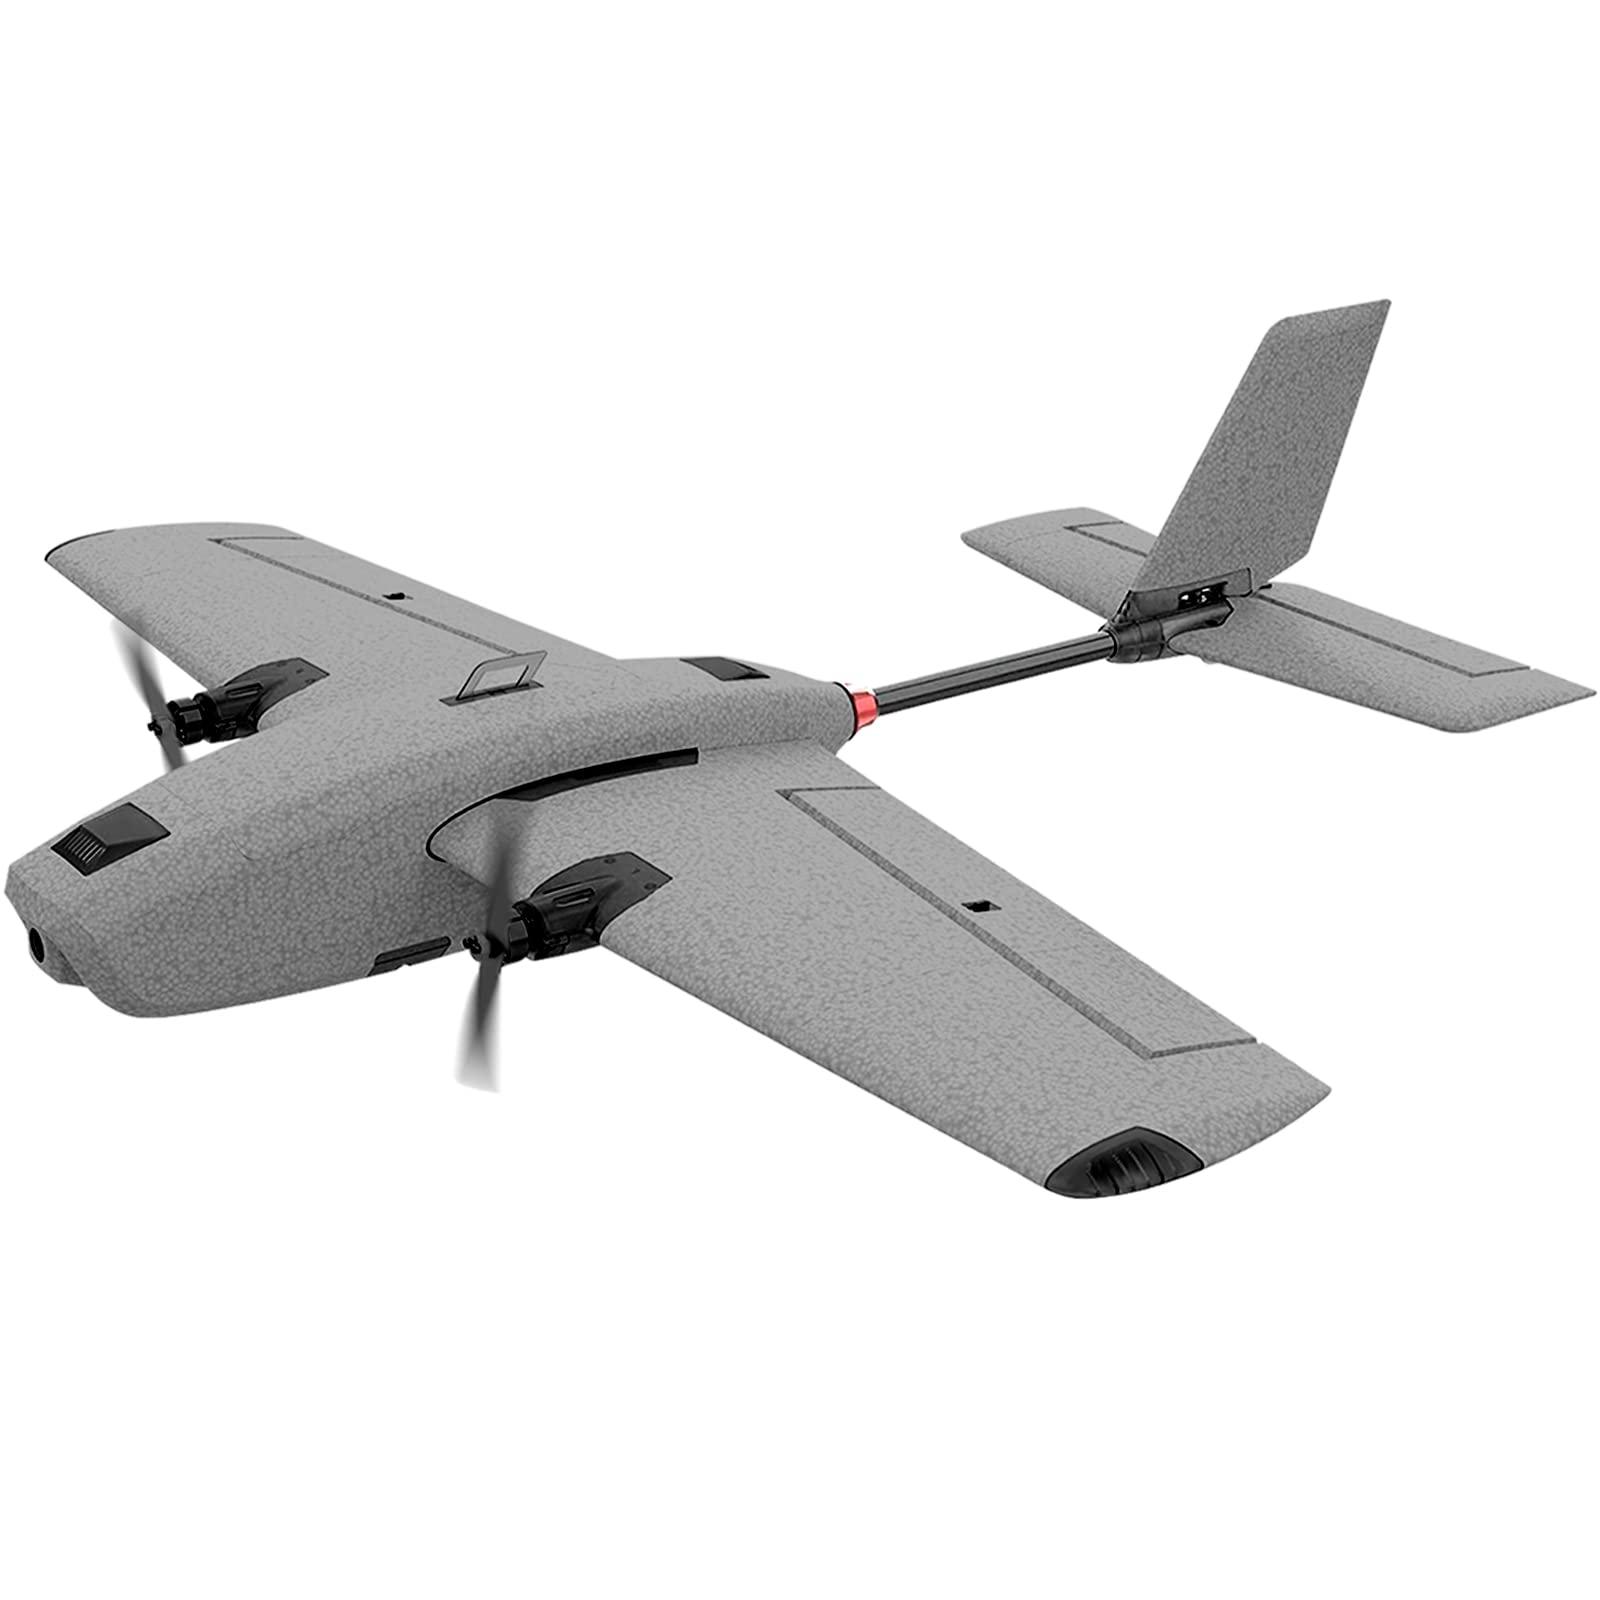 Skyhunter Rc Plane: Lightweight and durable, perfect for outdoor flying and strong winds.